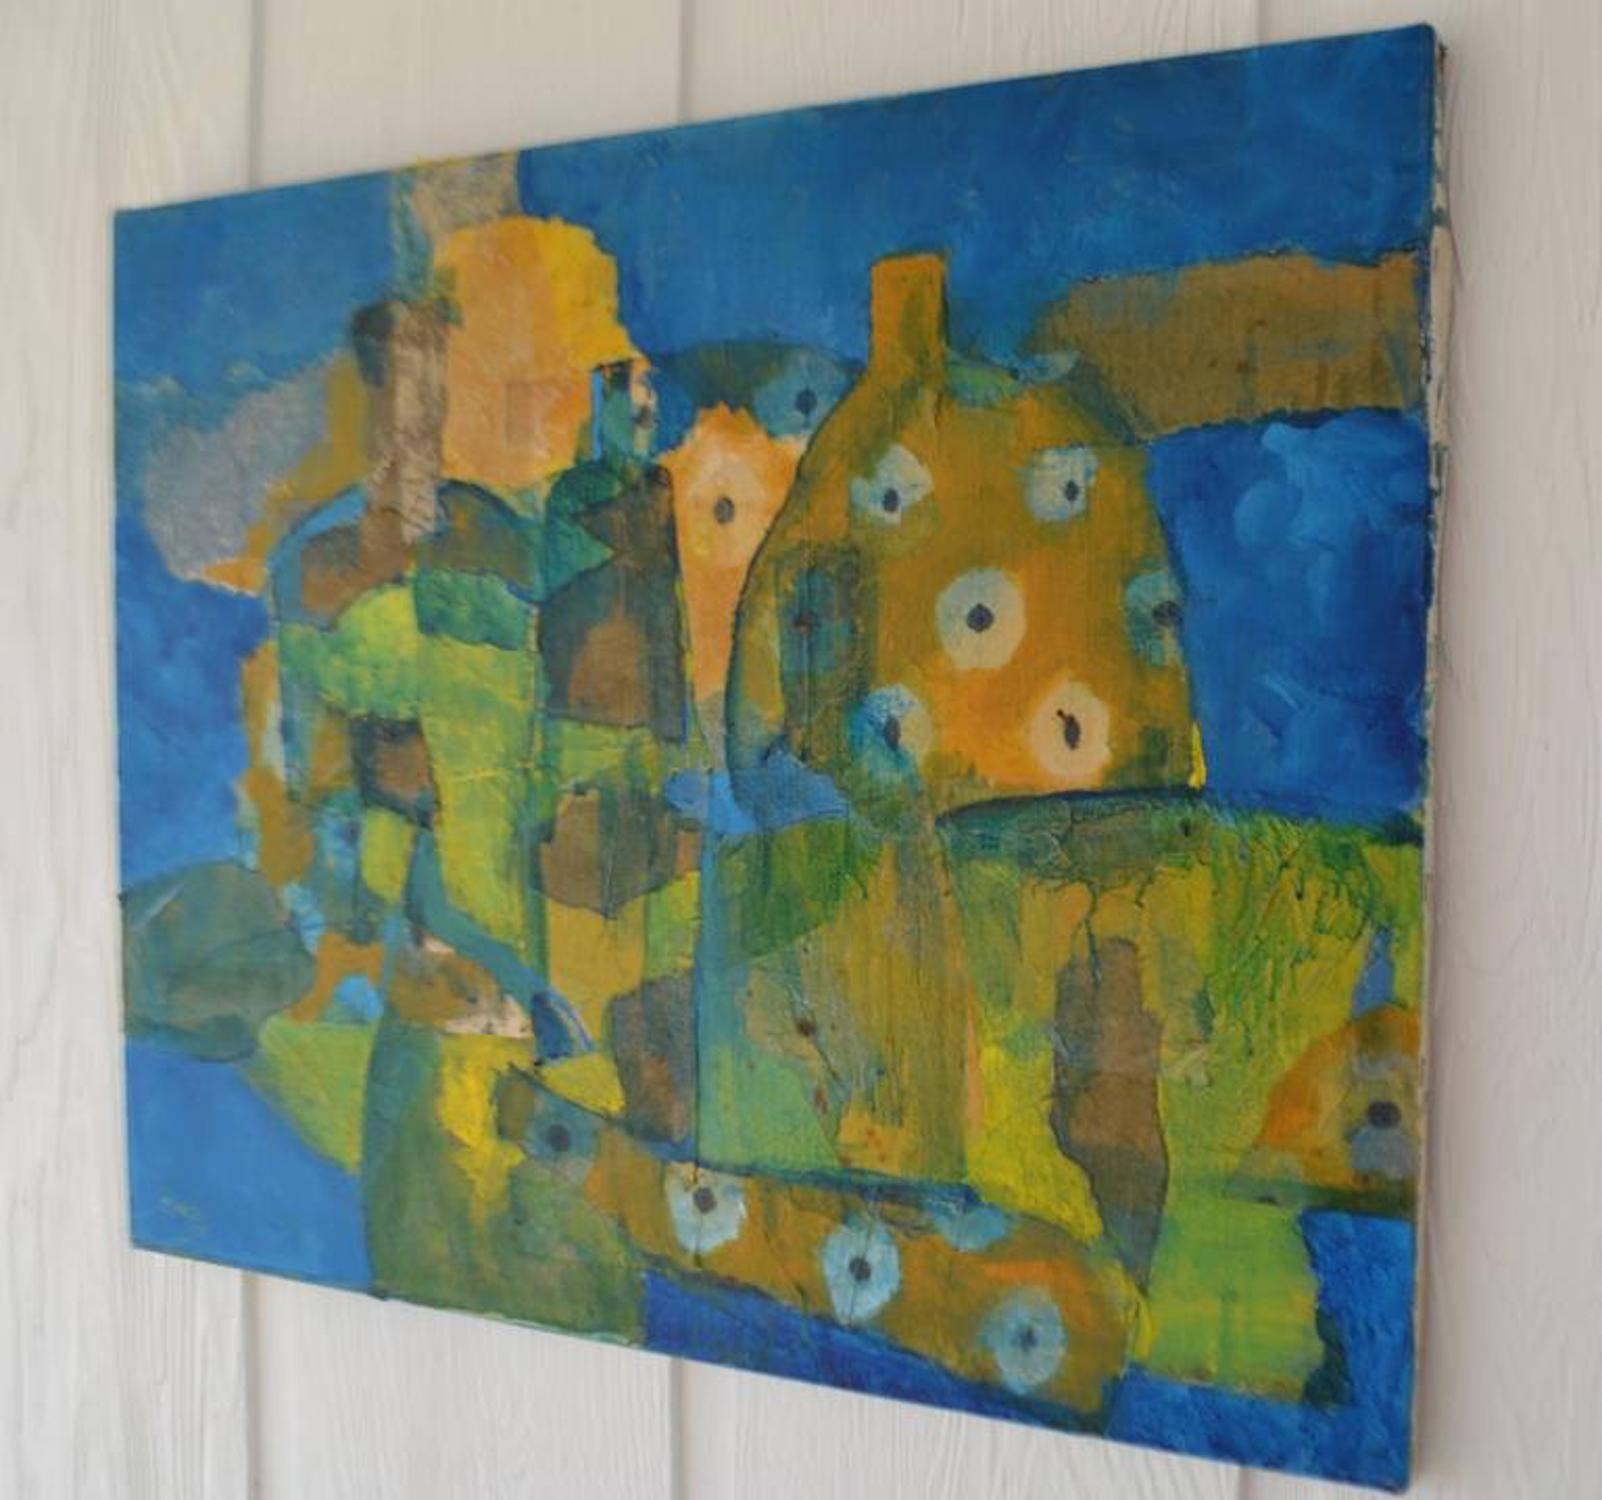 Midcentury Abstract Mixed-Media on Canvas In Good Condition For Sale In West Palm Beach, FL